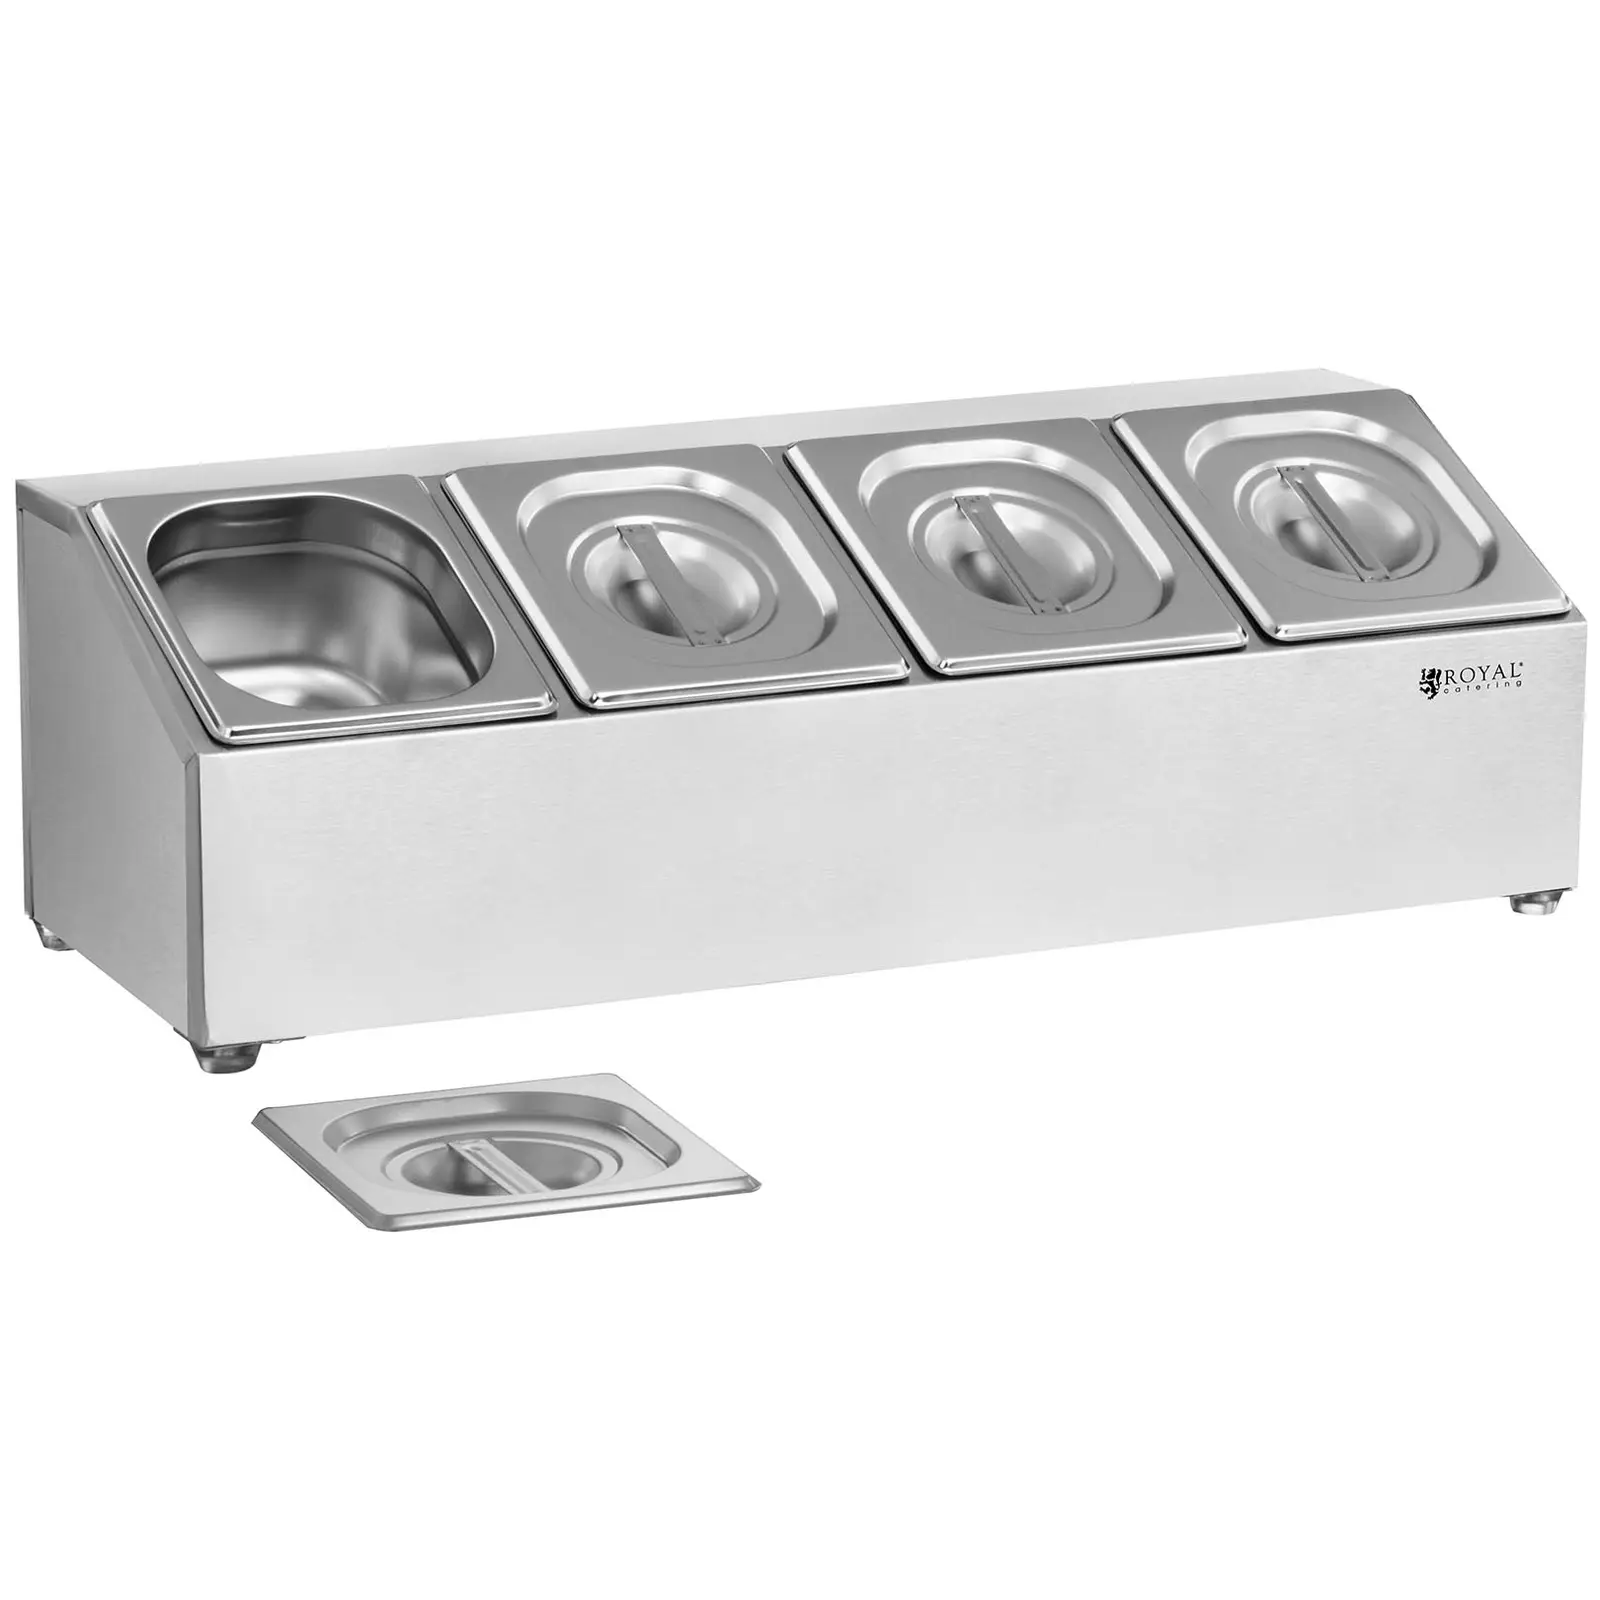 Gastronorm Pan Holder - Incl. 4 GN 1/6 Gastronorm Containers with Lids